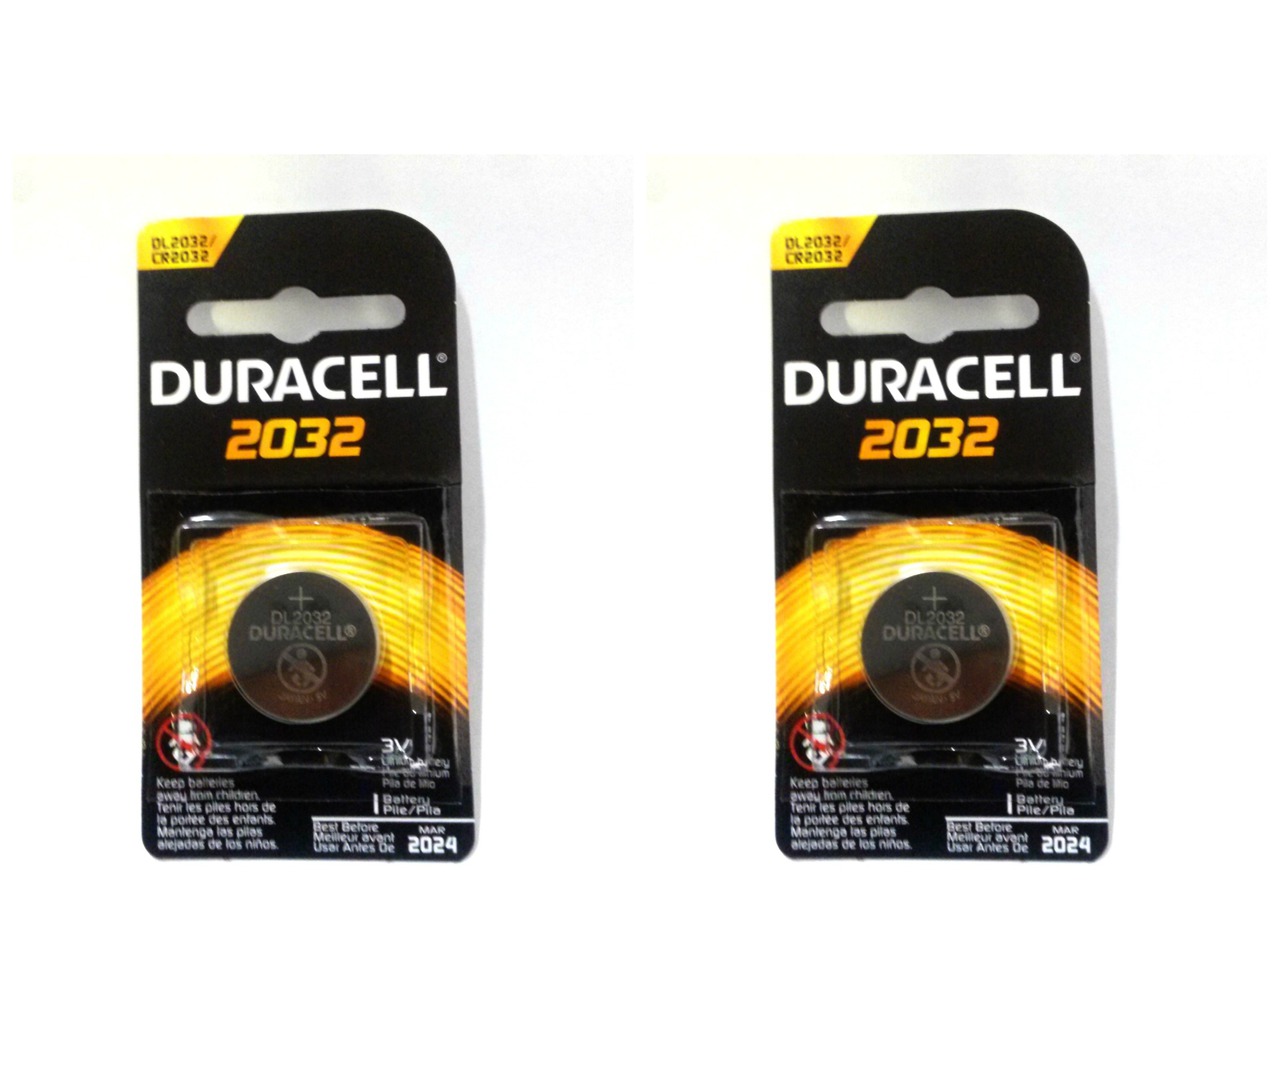 Duracell CR2032 Coin Battery - 2 Pack + FREE SHIPPING